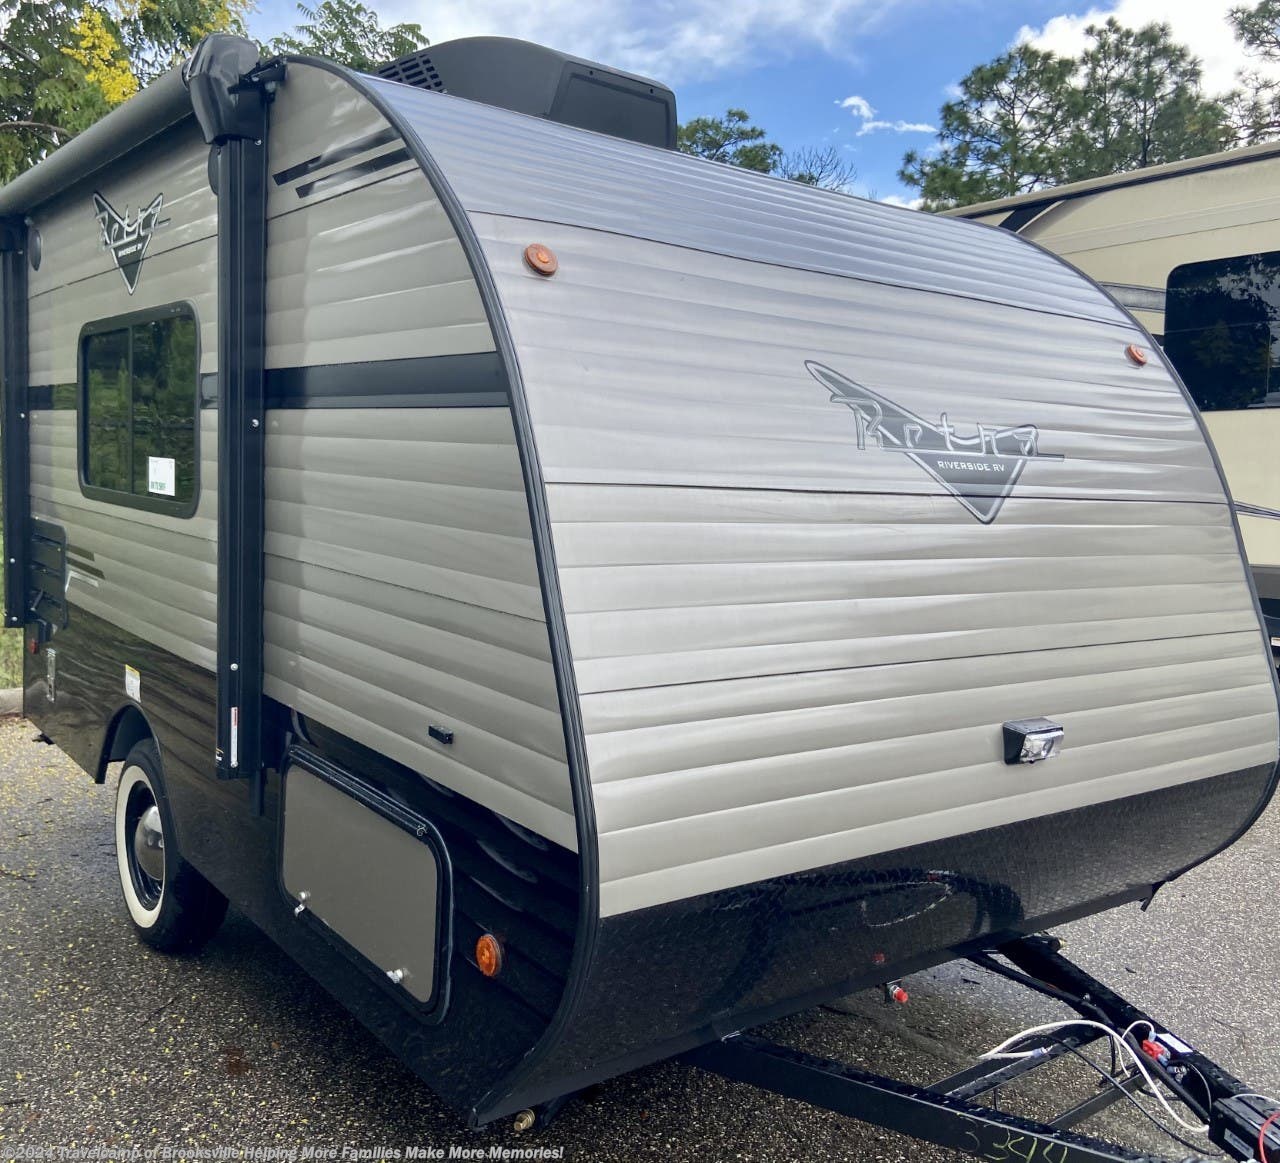 Used Riverside Travel trailers for sale